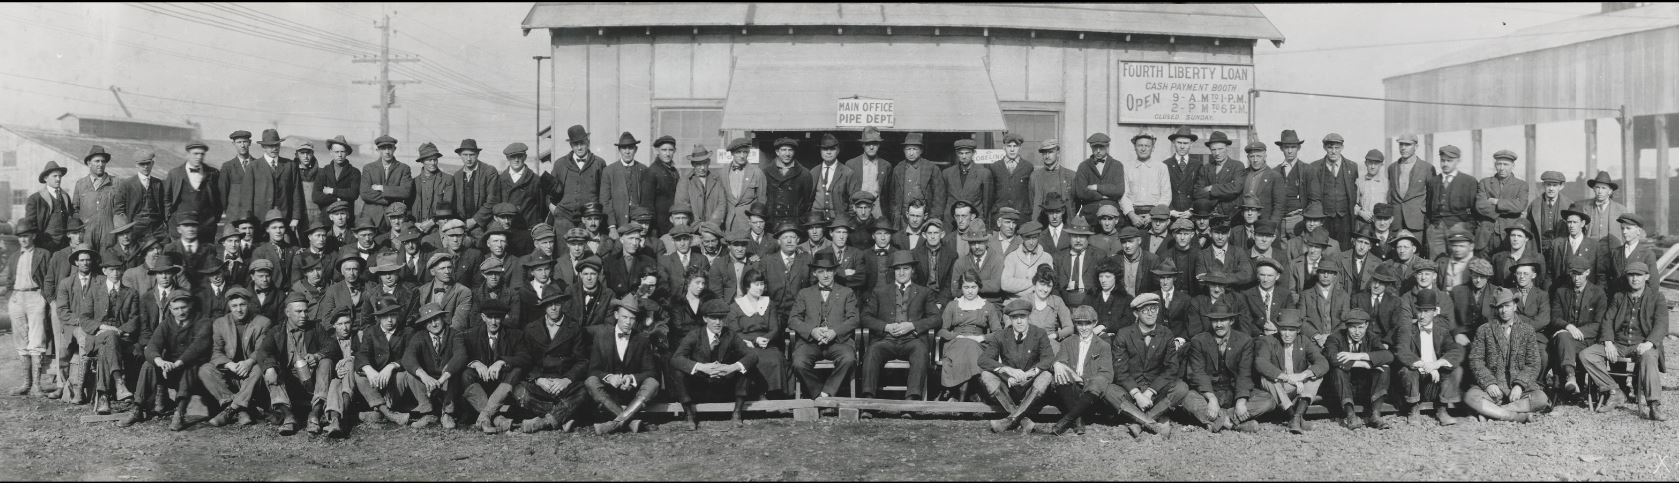 old_hickory_employees_1917.JPG